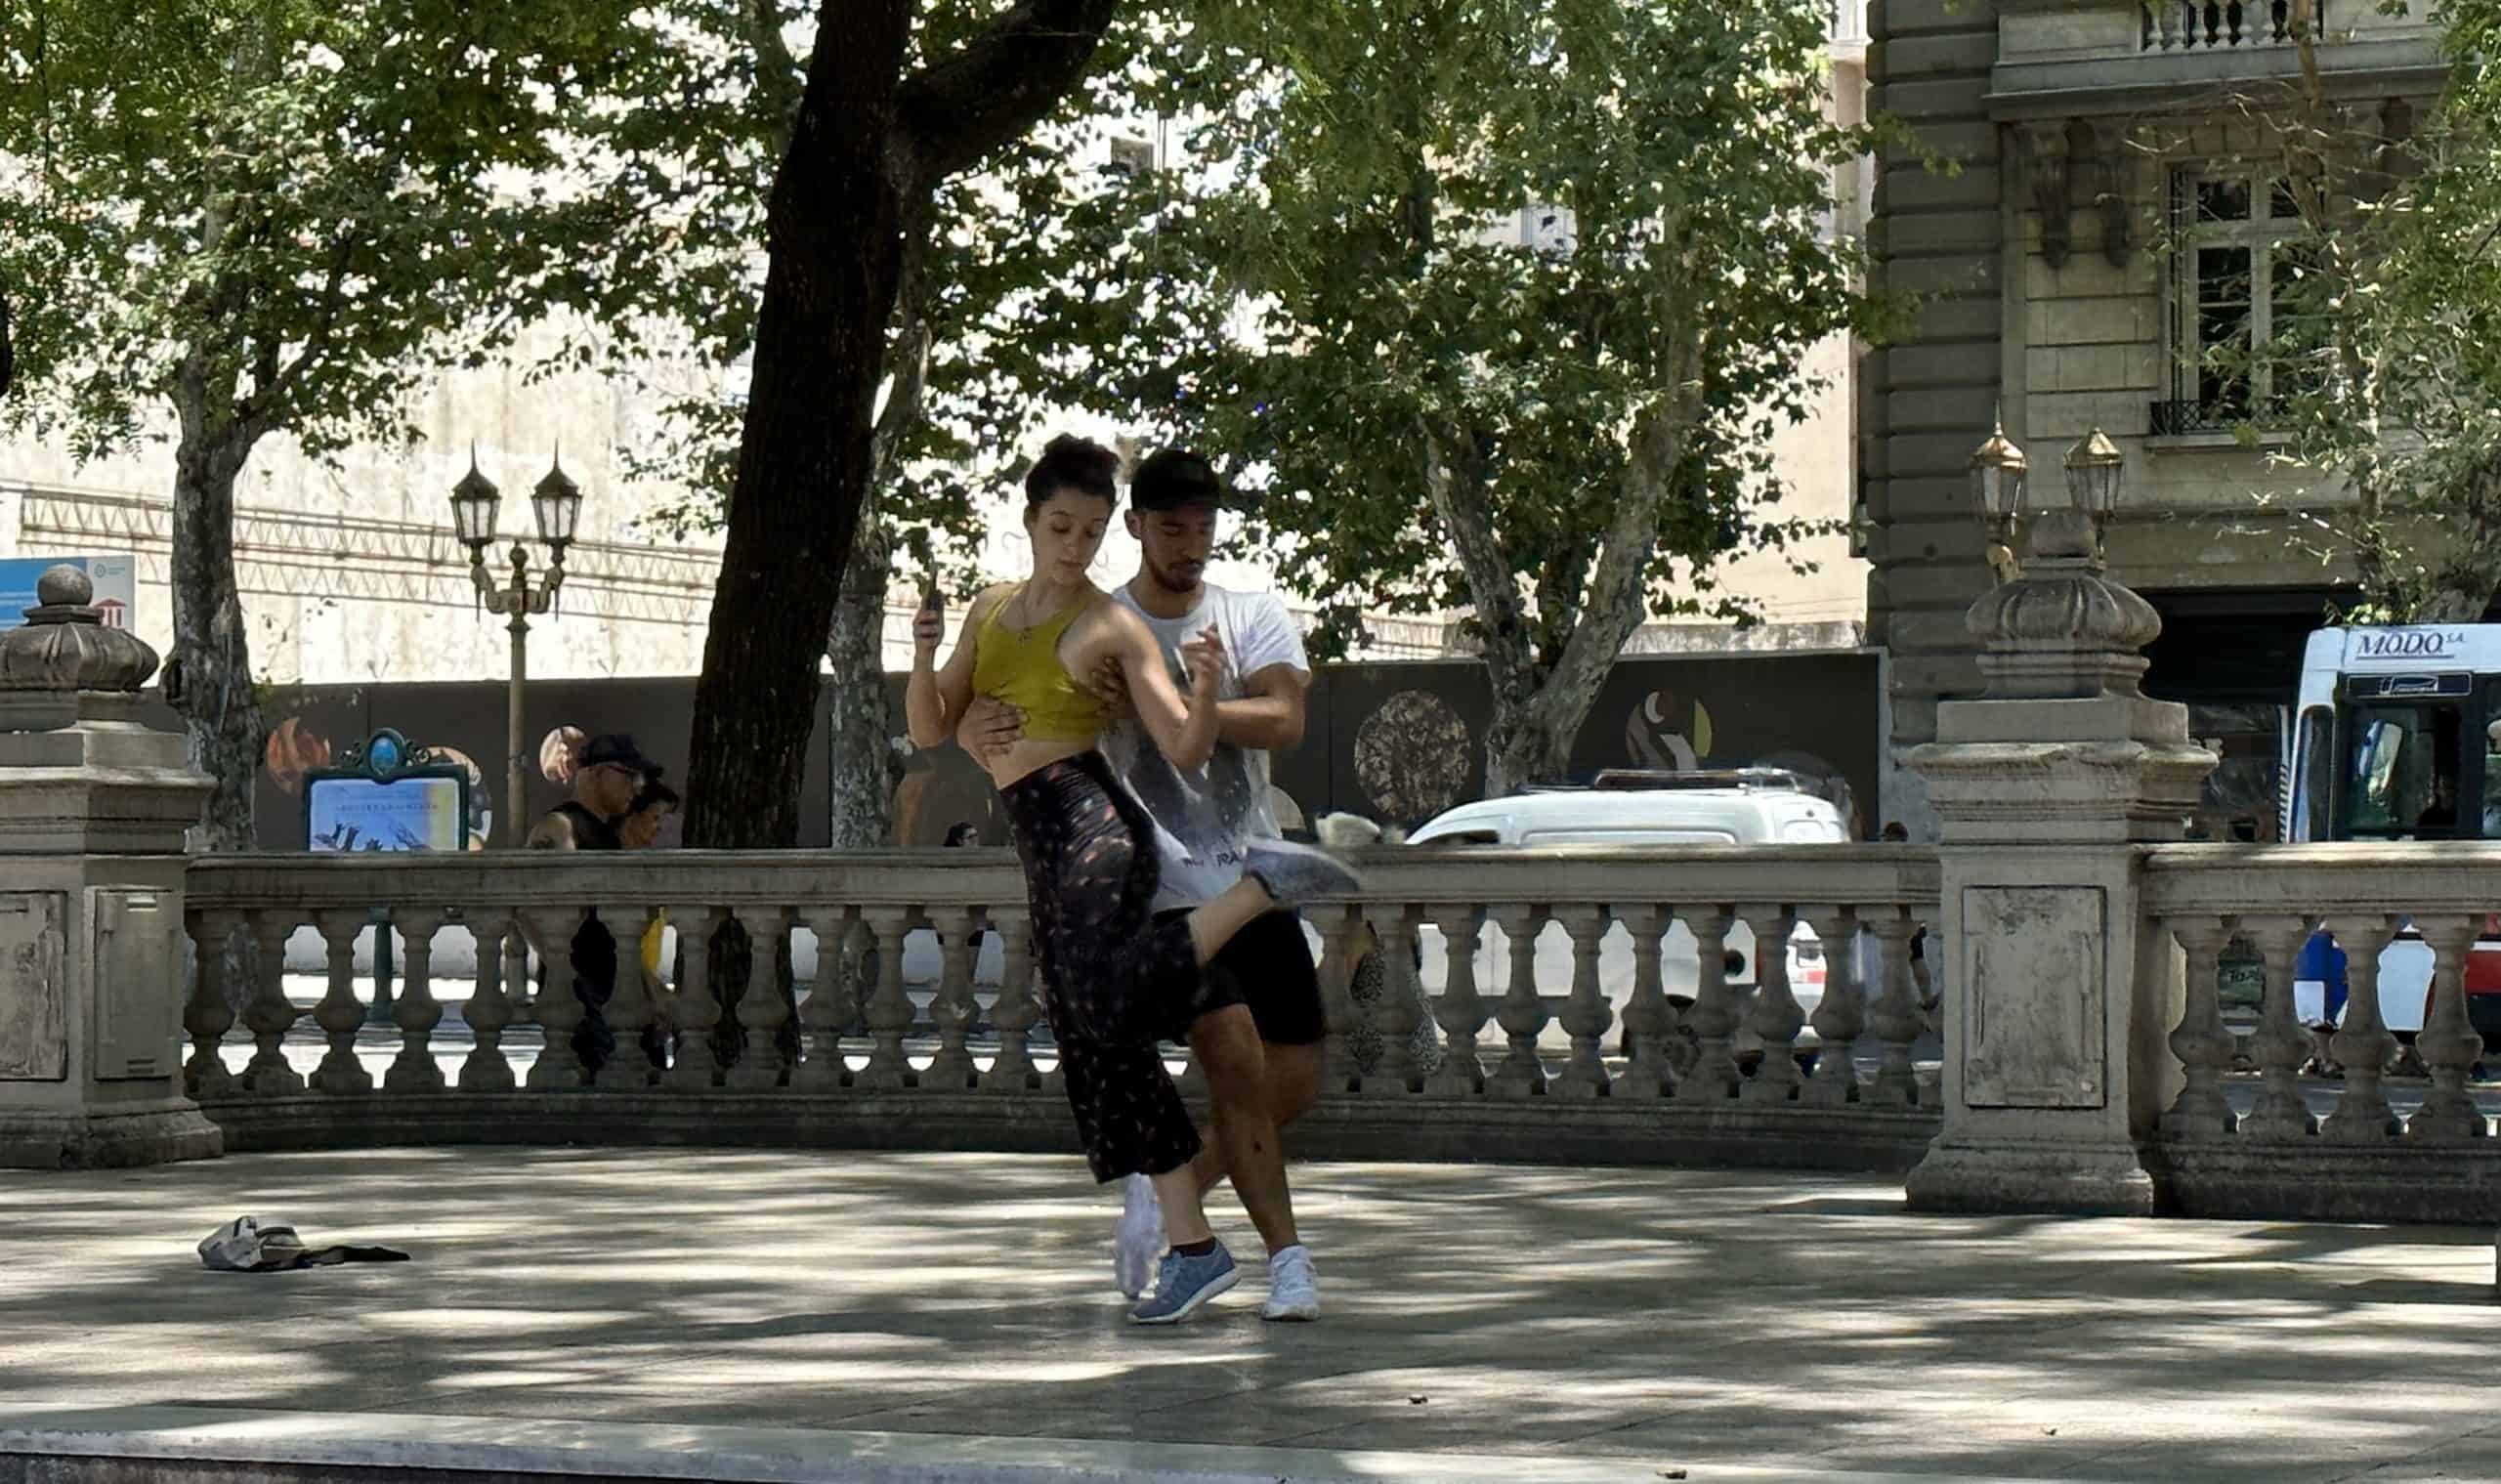 Couple dancing the tango in the park